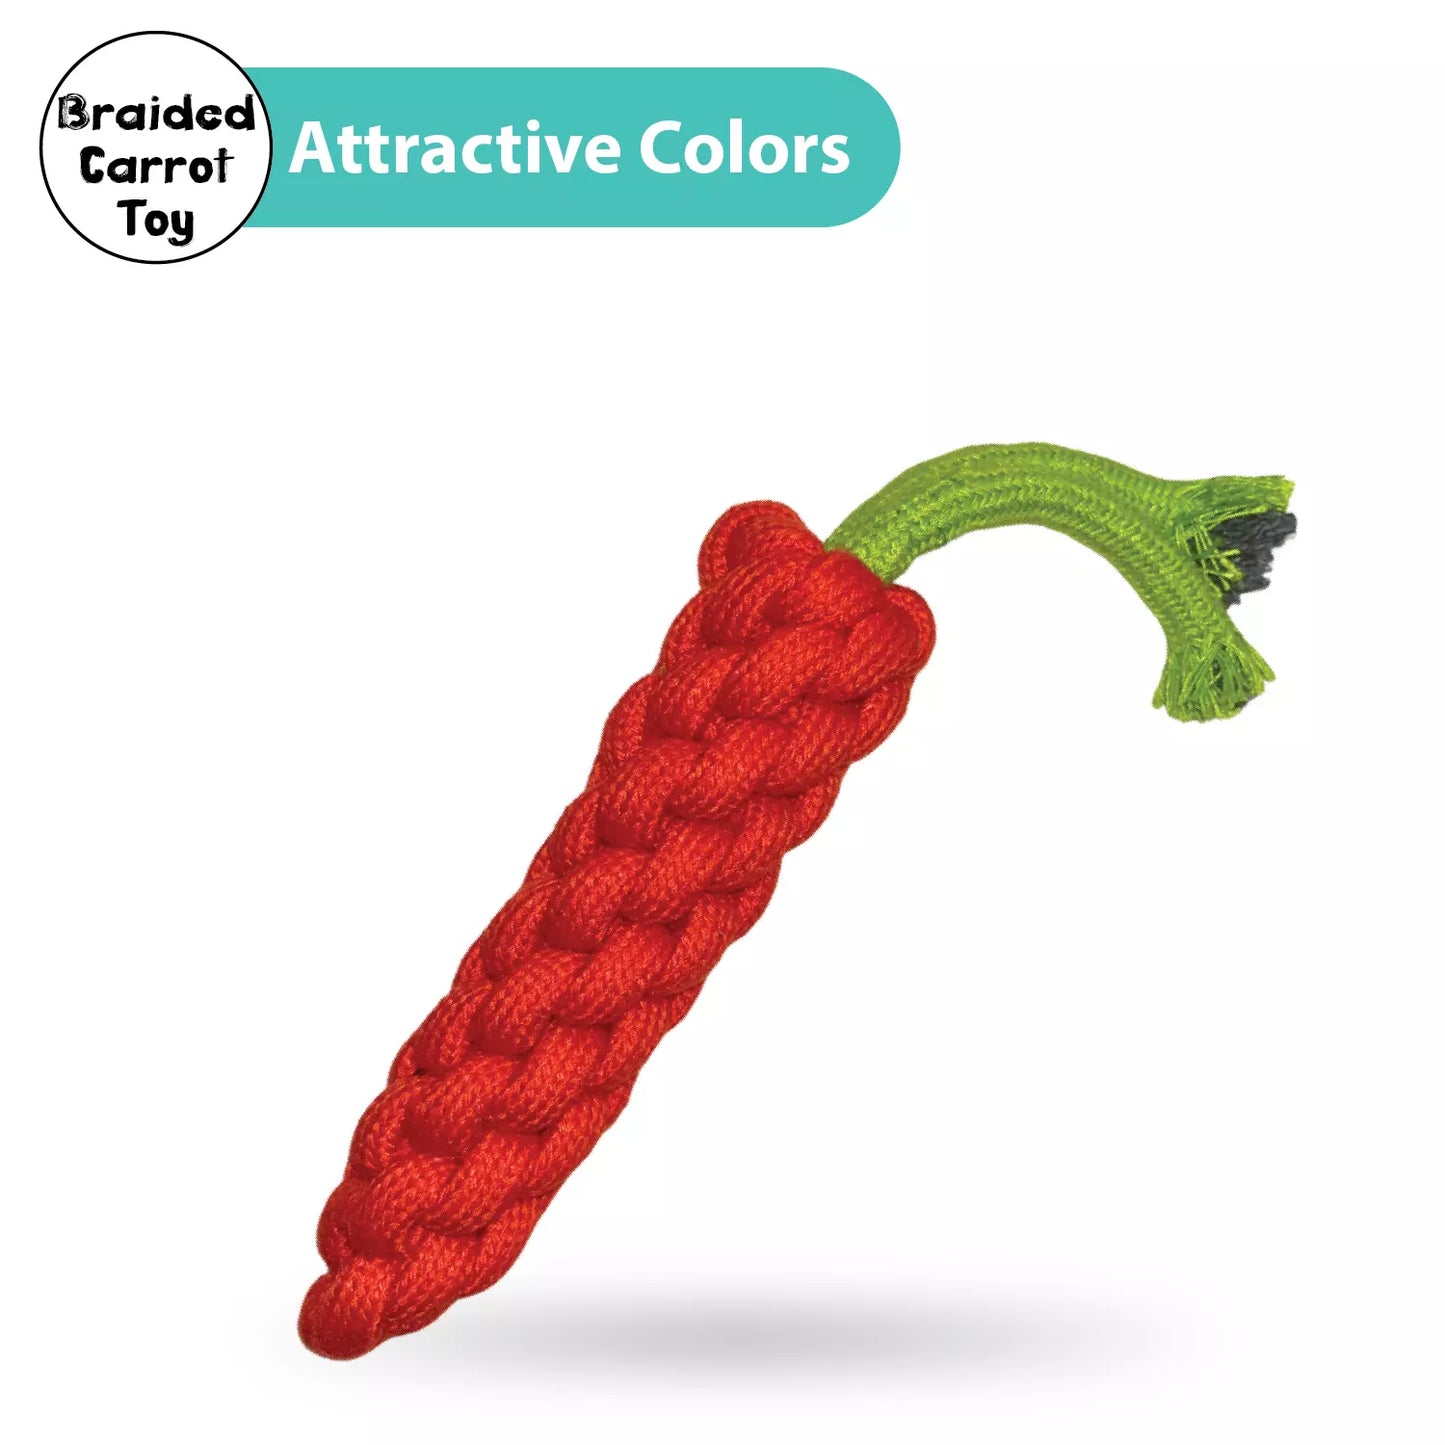 Braided Carrot Toy - Worth Rs.160